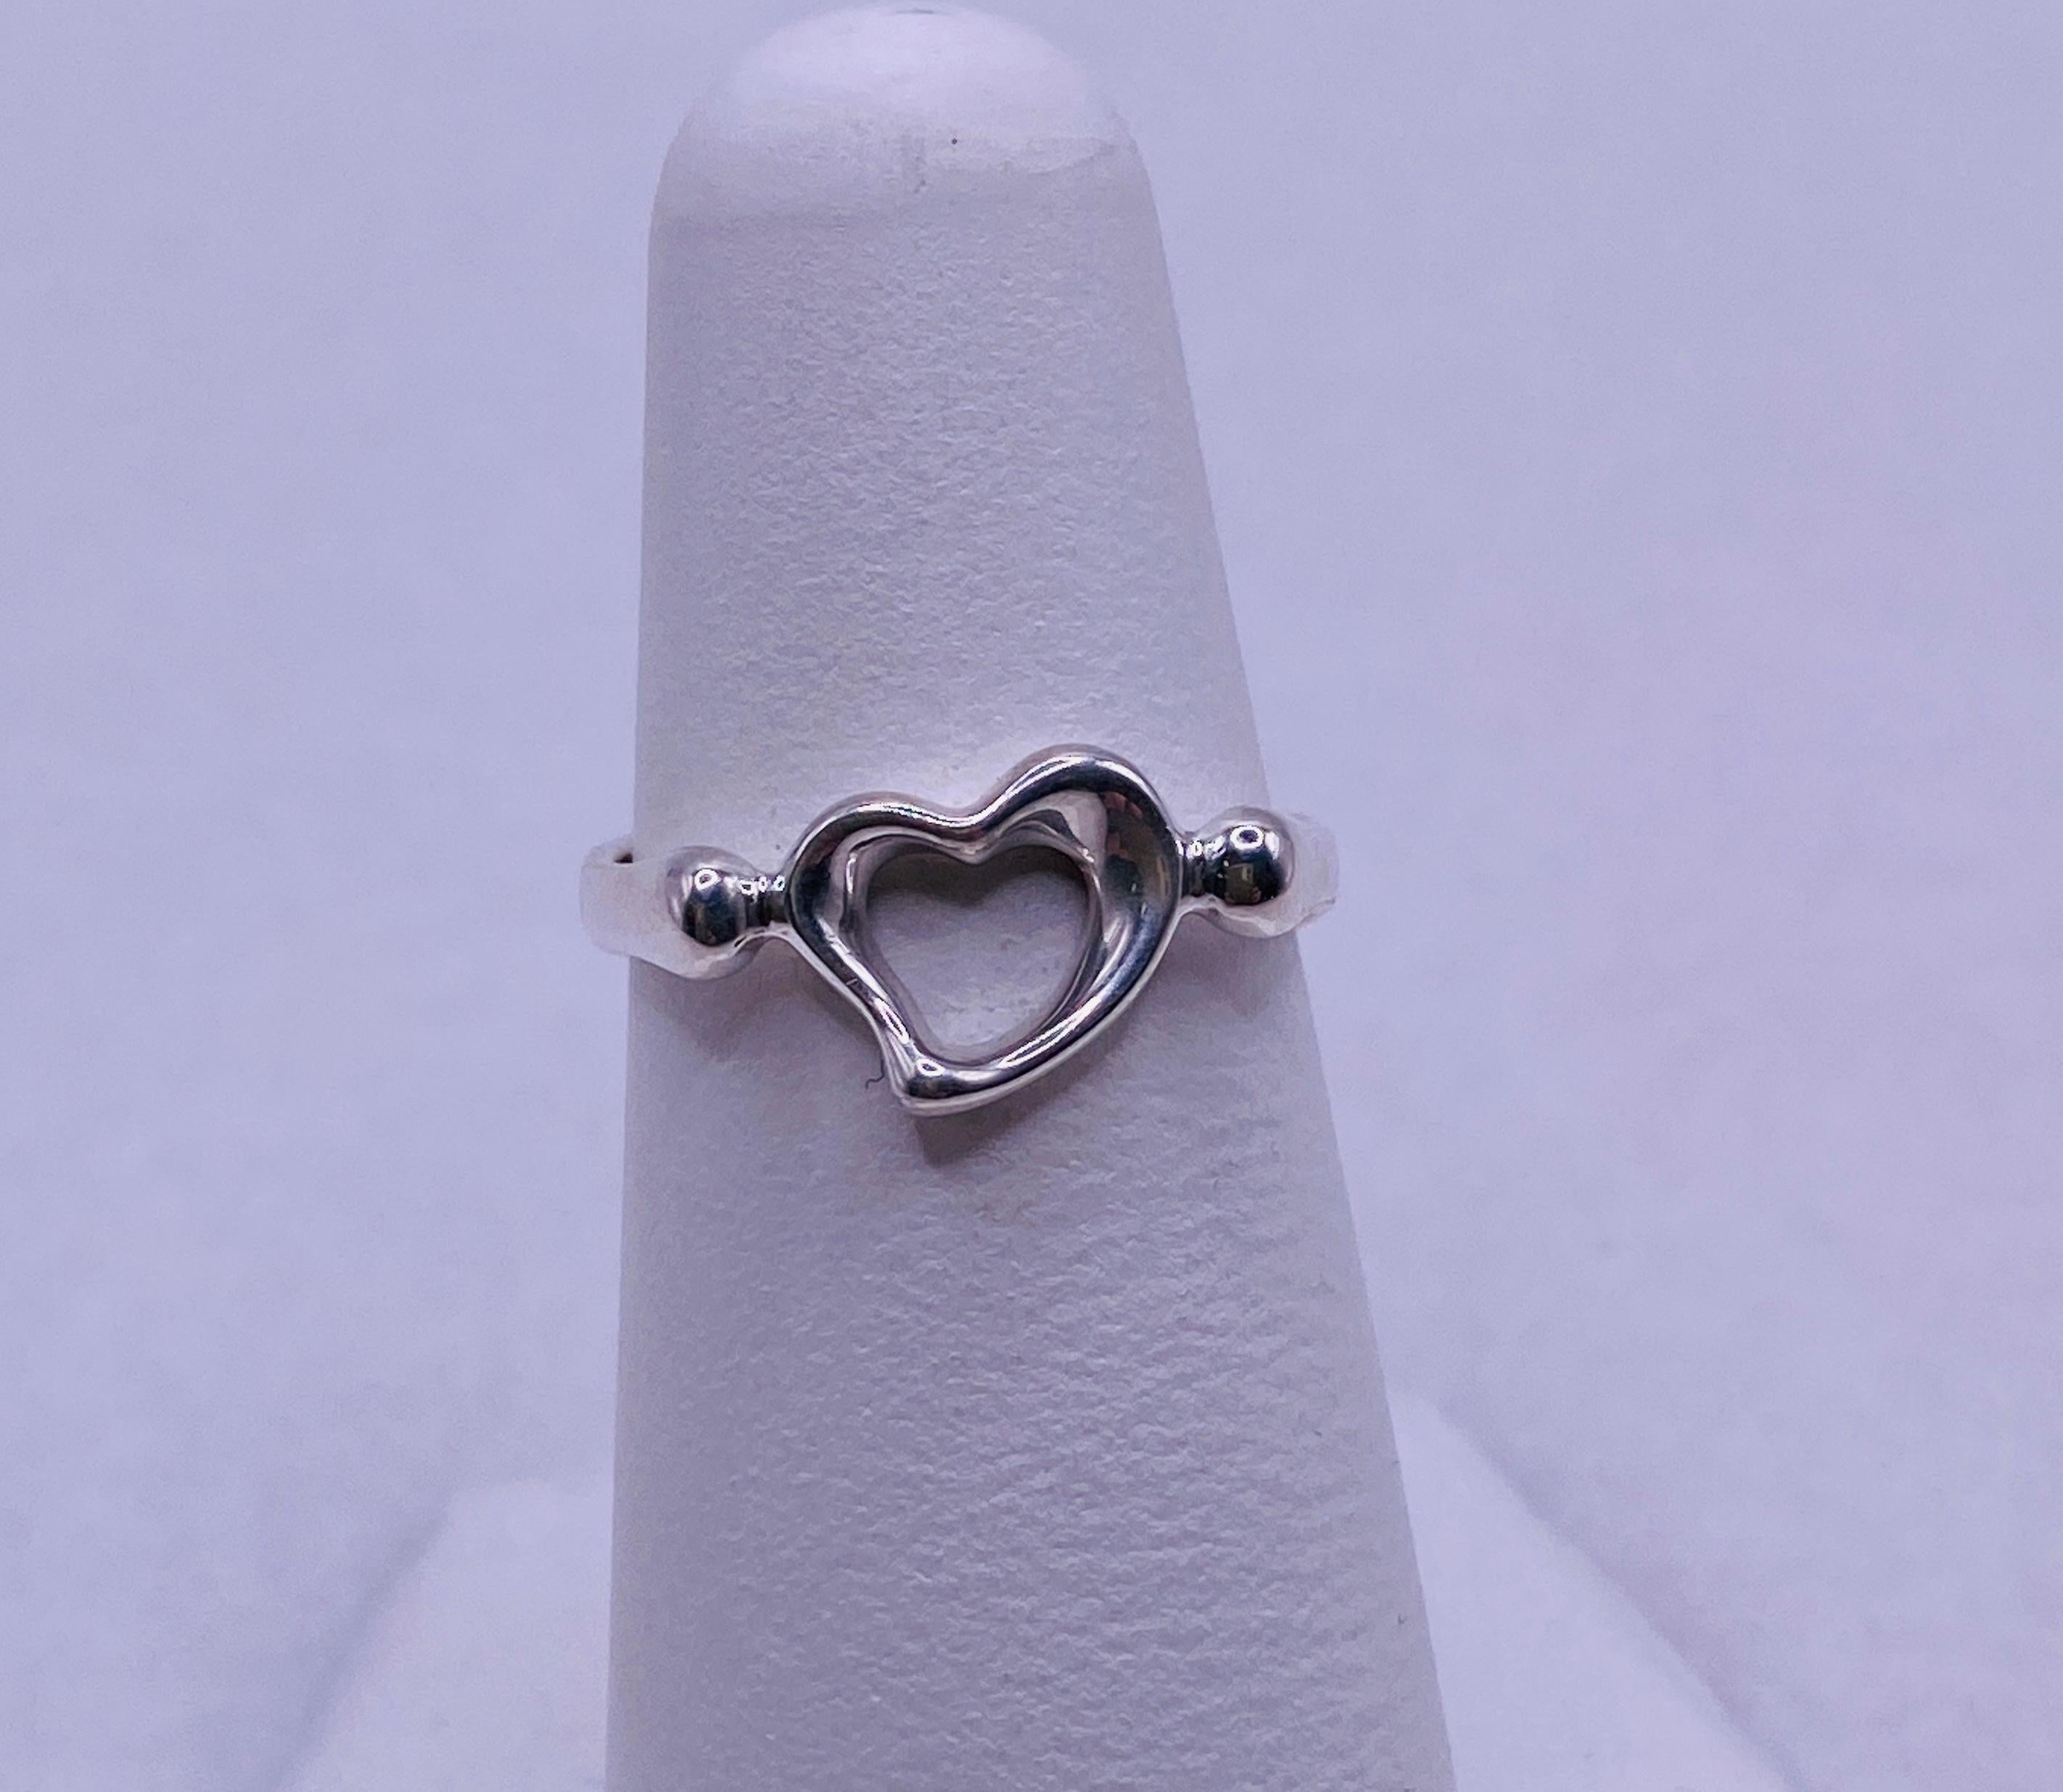 Tiffany & Co Peretti sterling silver open heart ring. Made in Spain. Size 5.5 US